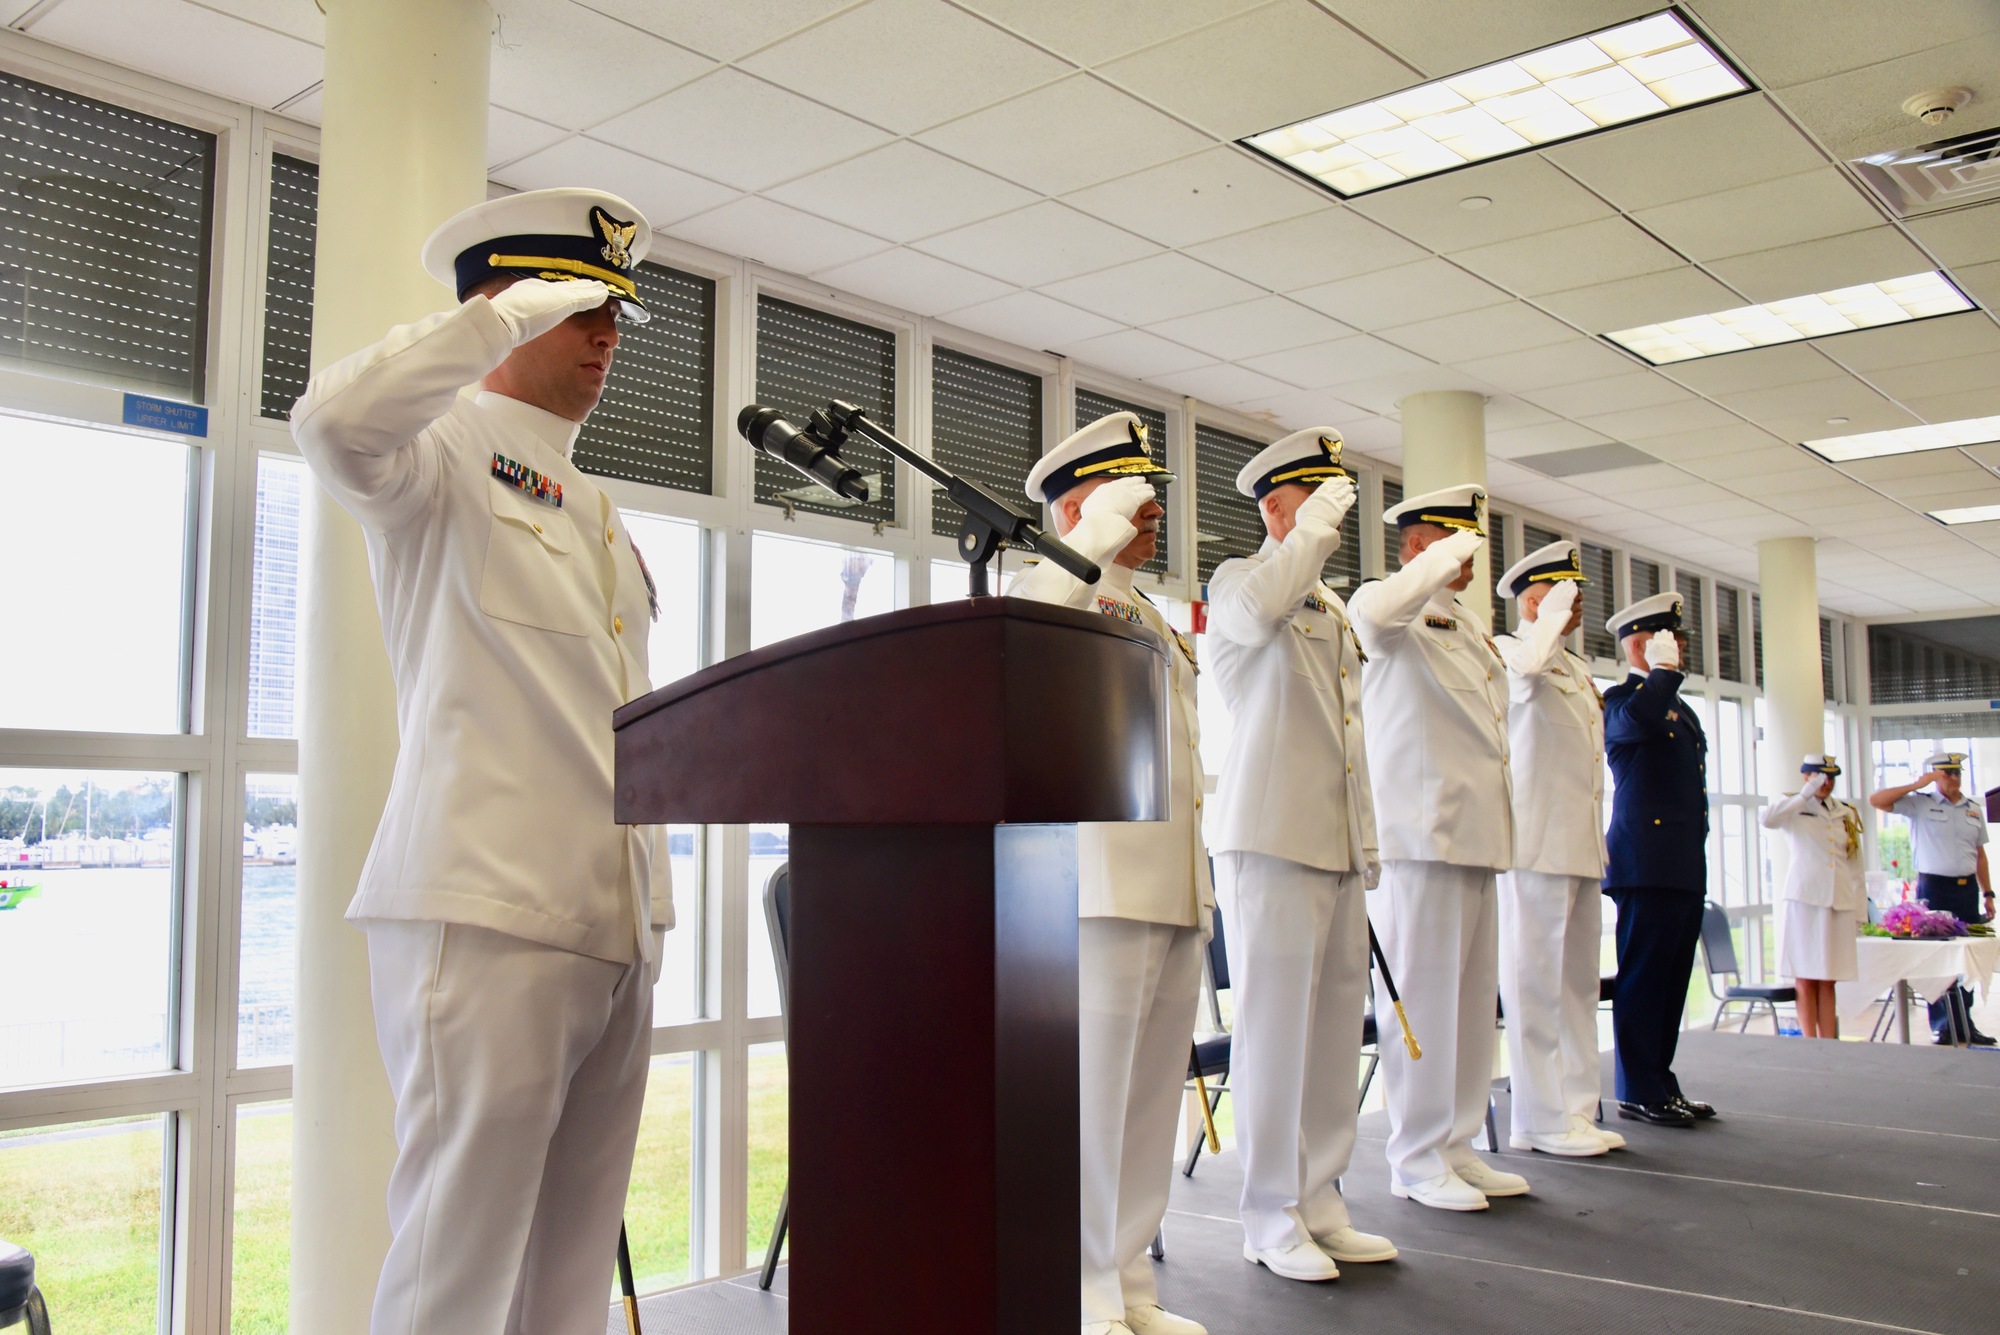 Coast Guard Base Miami Beach holds change-of-command ceremony 